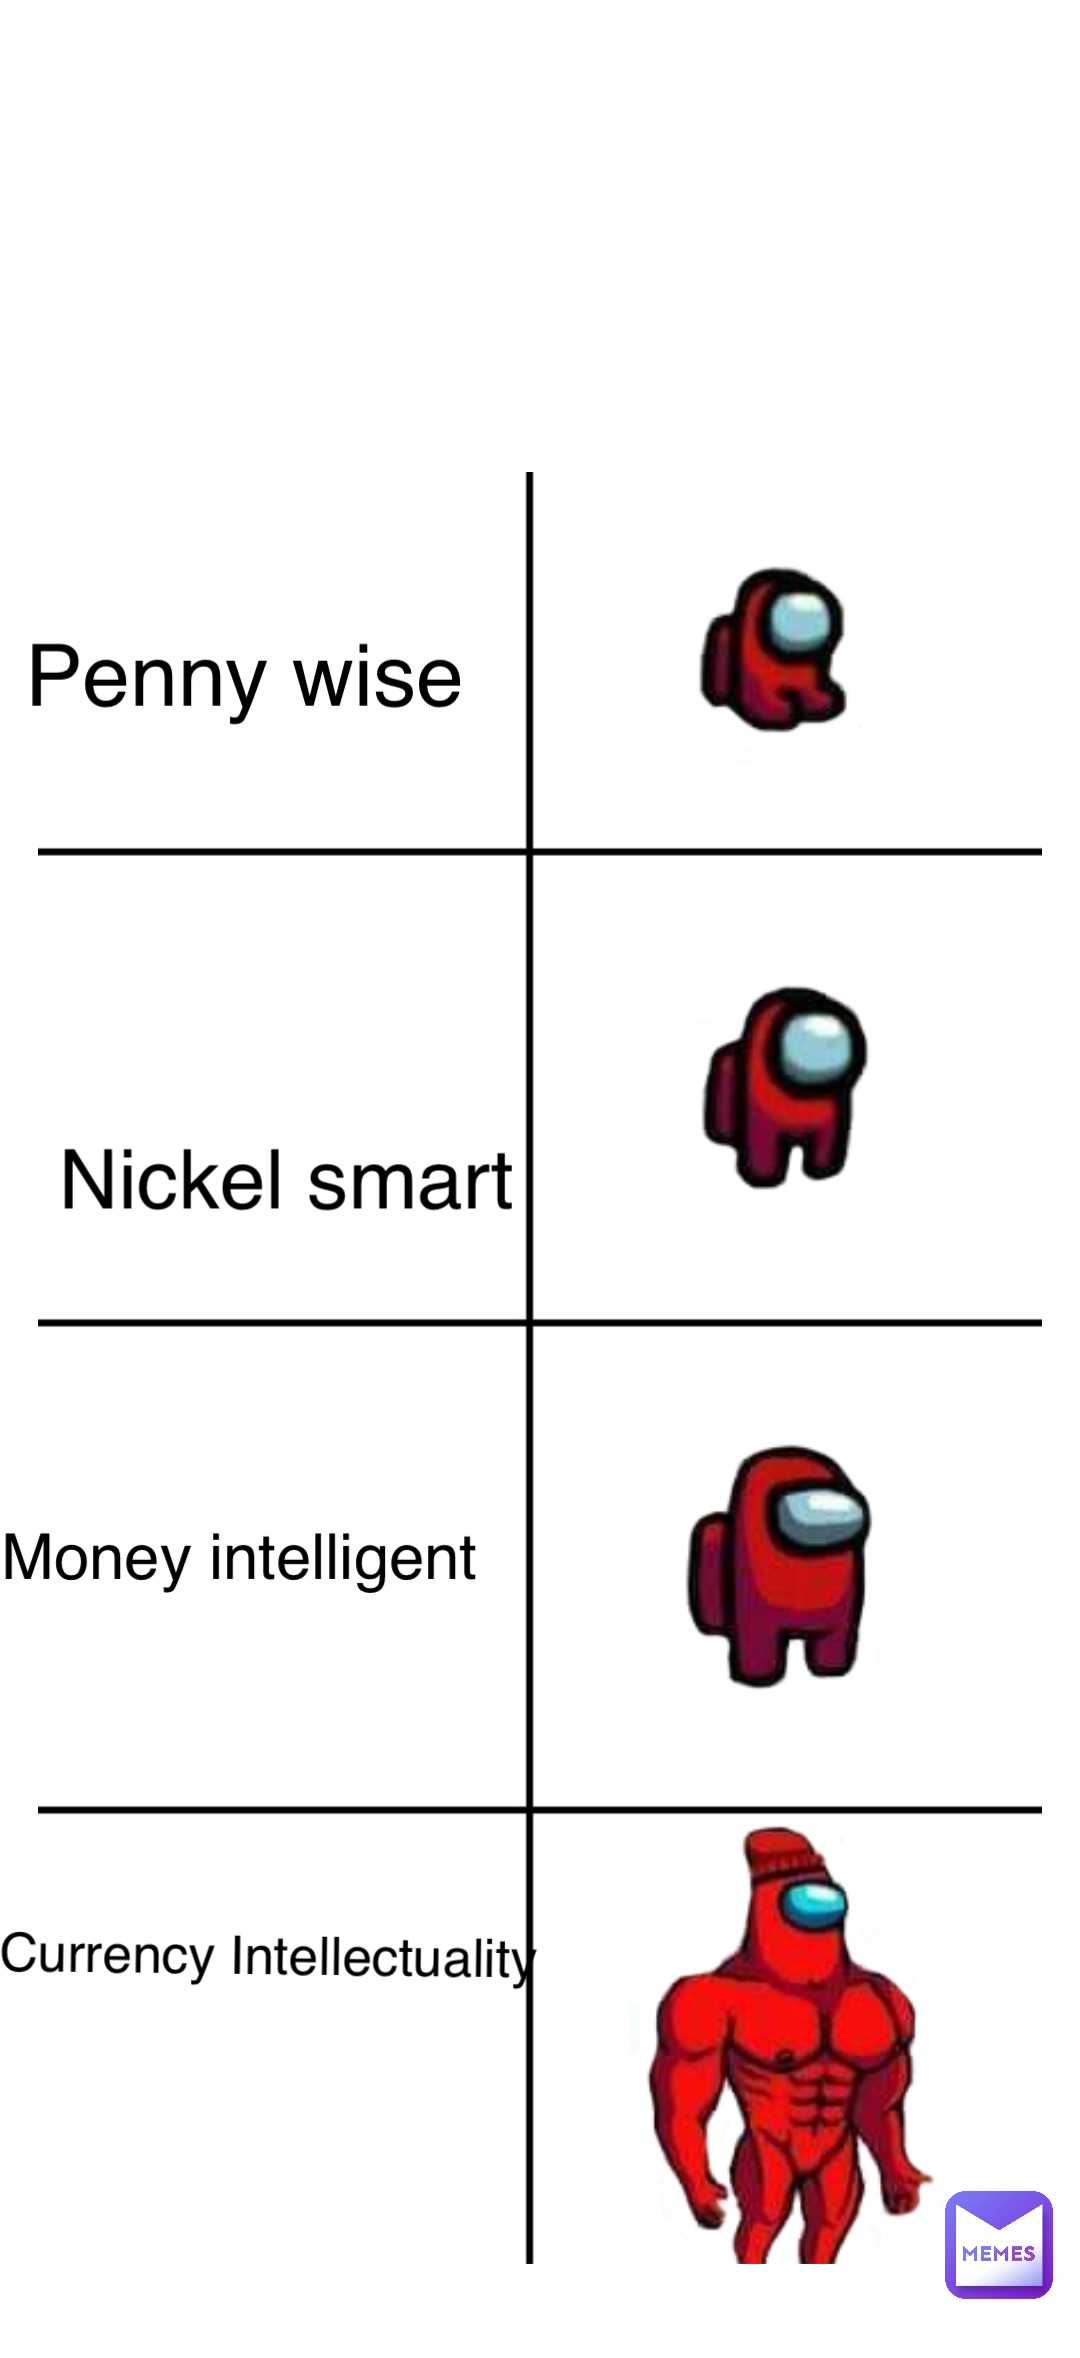 Double tap to edit Penny wise Nickel smart Money intelligent Currency Intellectuality